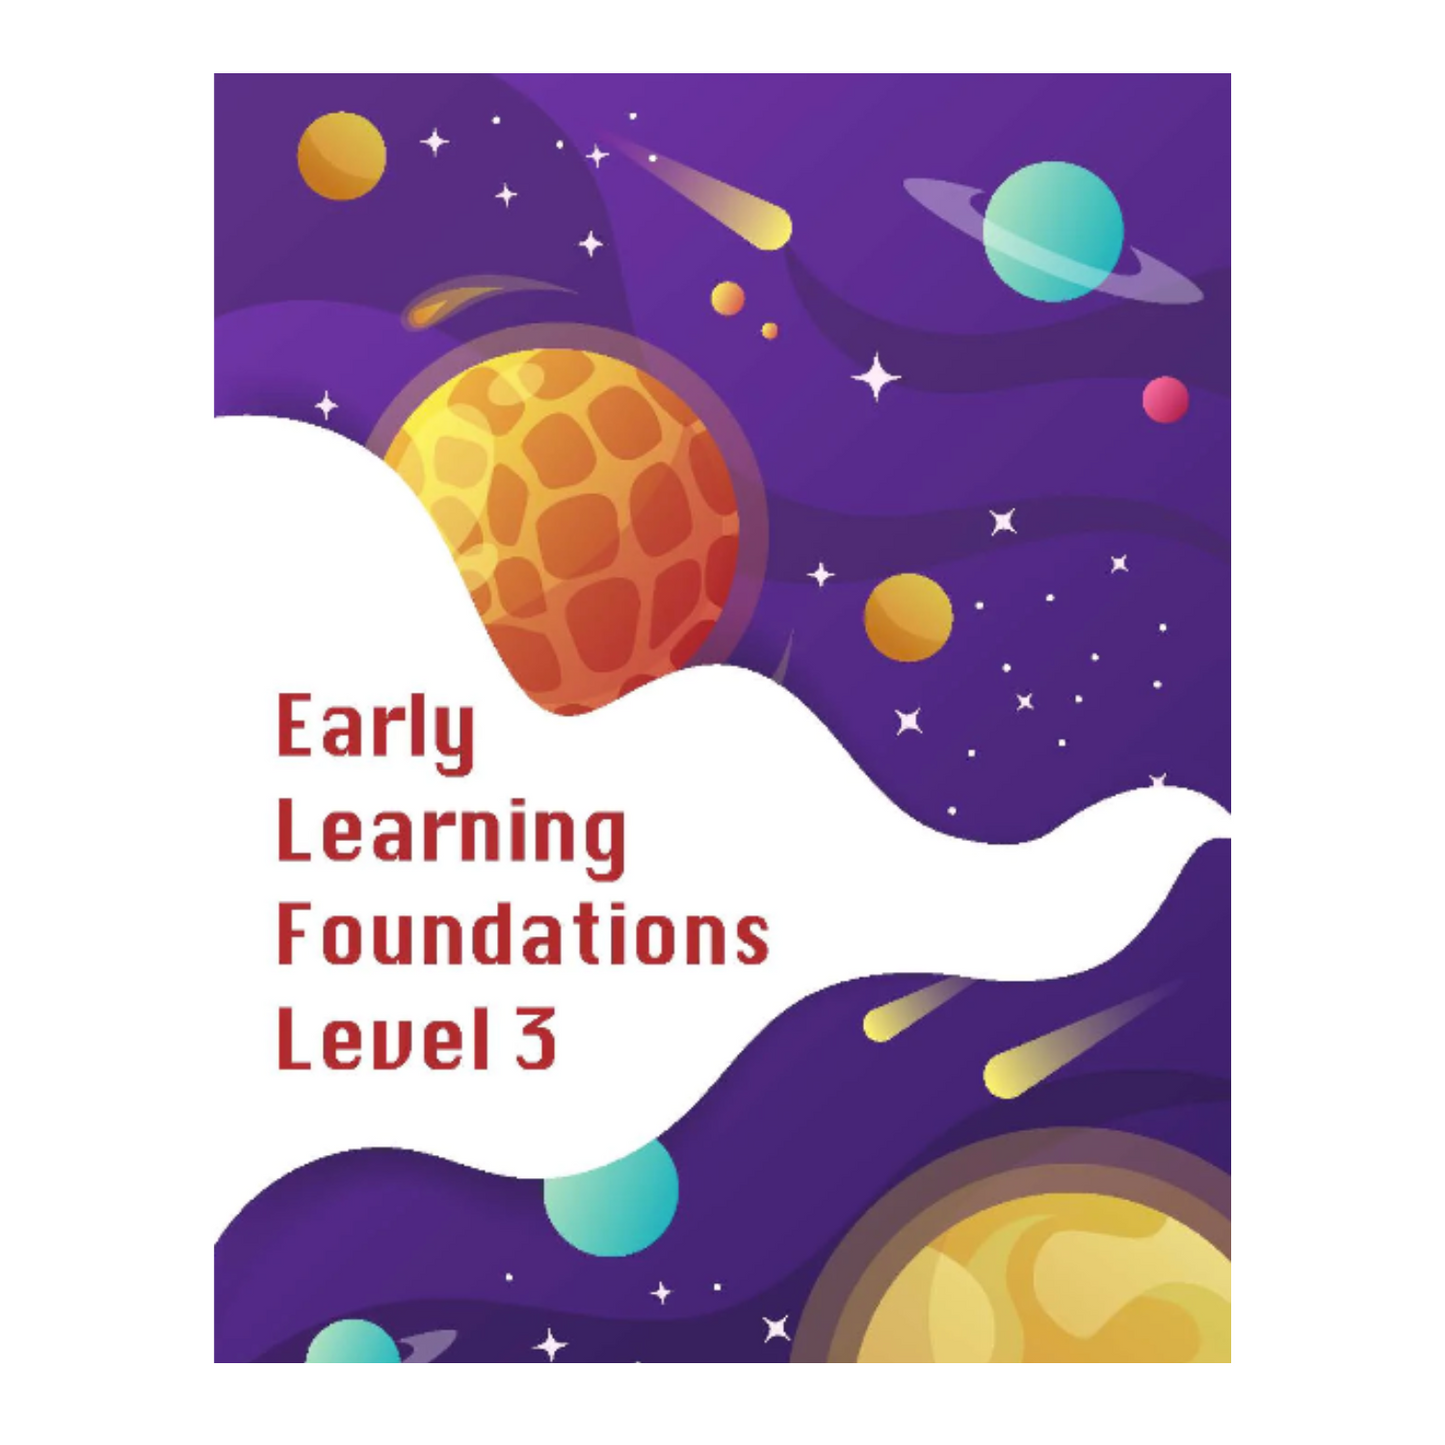 Early Learning Foundations Level 3